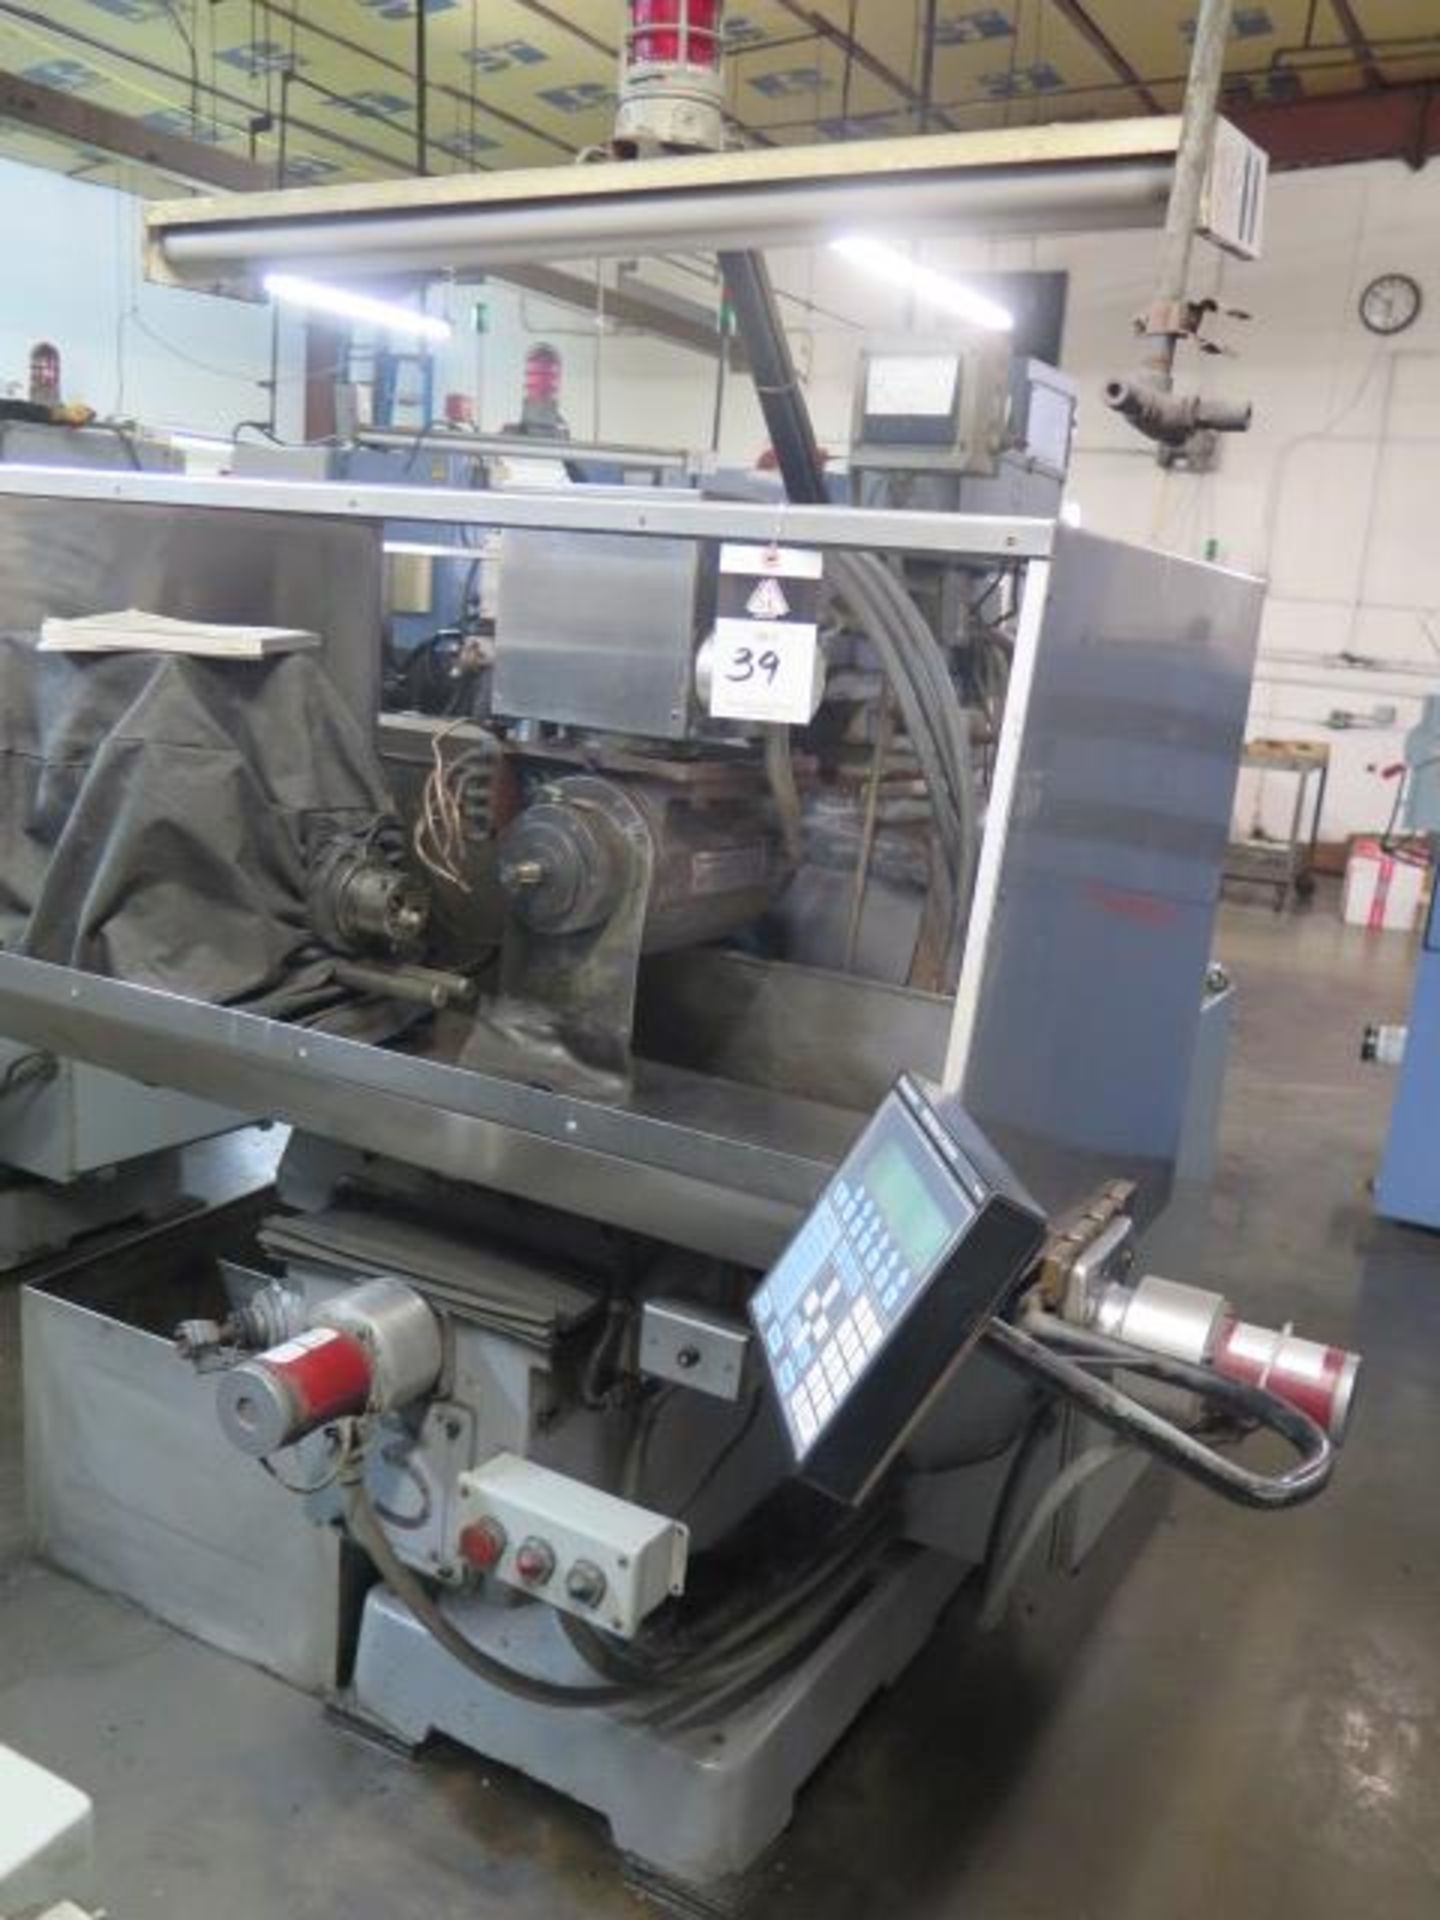 Custom 4-Axis CNC Tool and Cutter Grinders w/ Compumotor 4000 Controls (SOLD AS-IS - NO WARRANTY) - Image 2 of 10